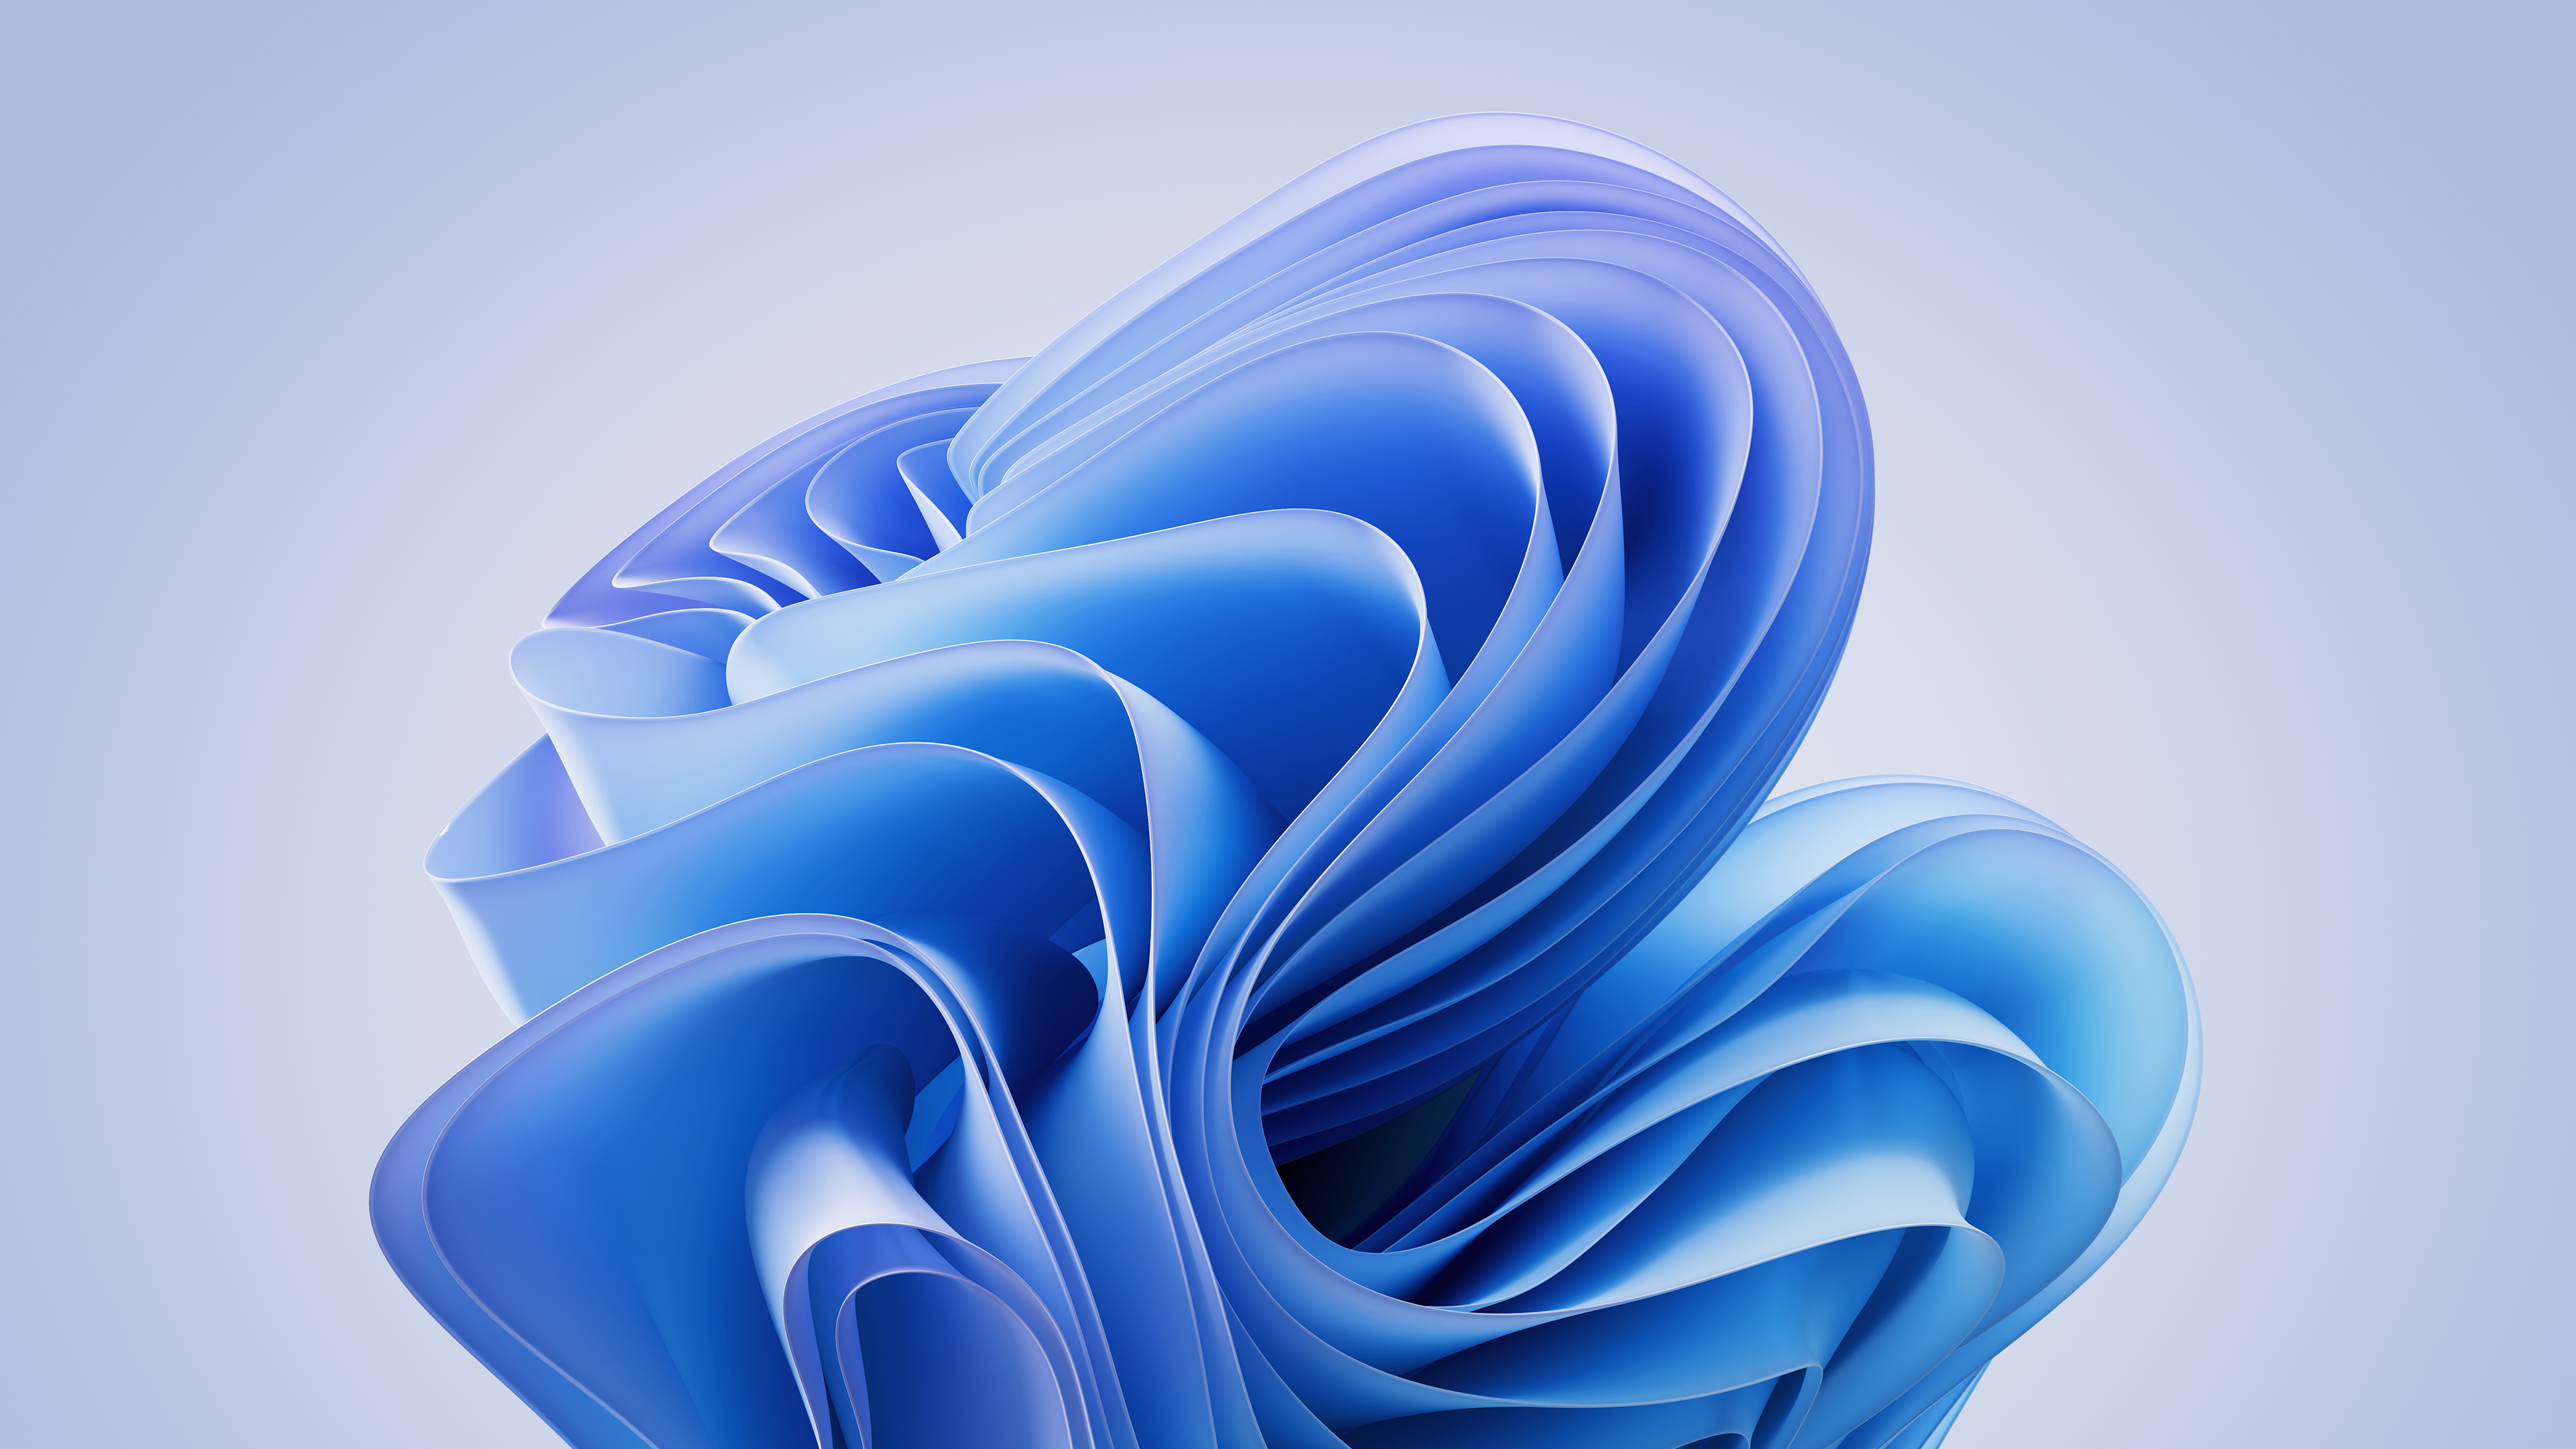 Abstract Blue And White Background Stock Photo, Picture and